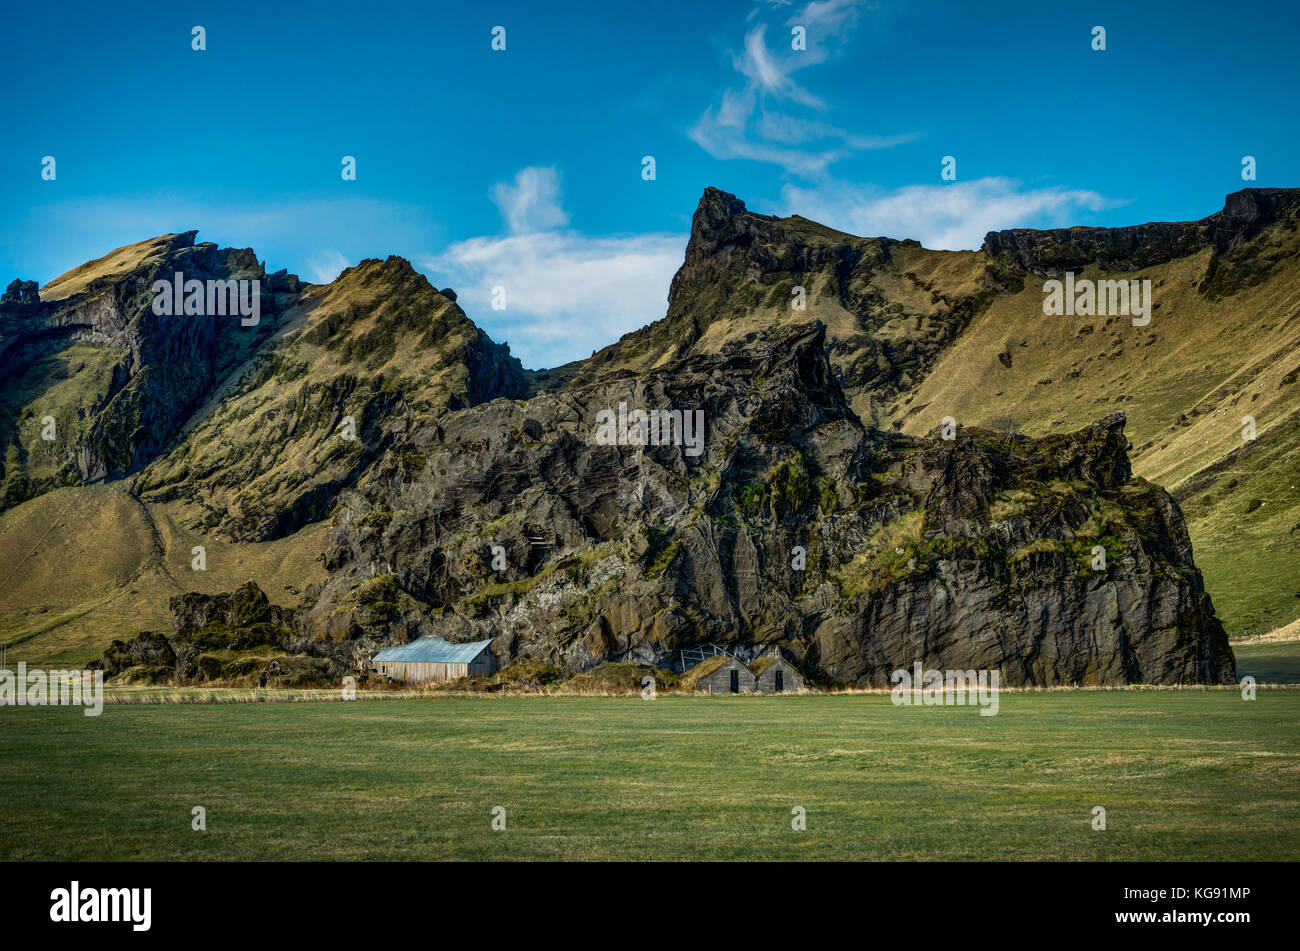 Iceland Landscape with green moss and view towards mountains clo Stock Photo